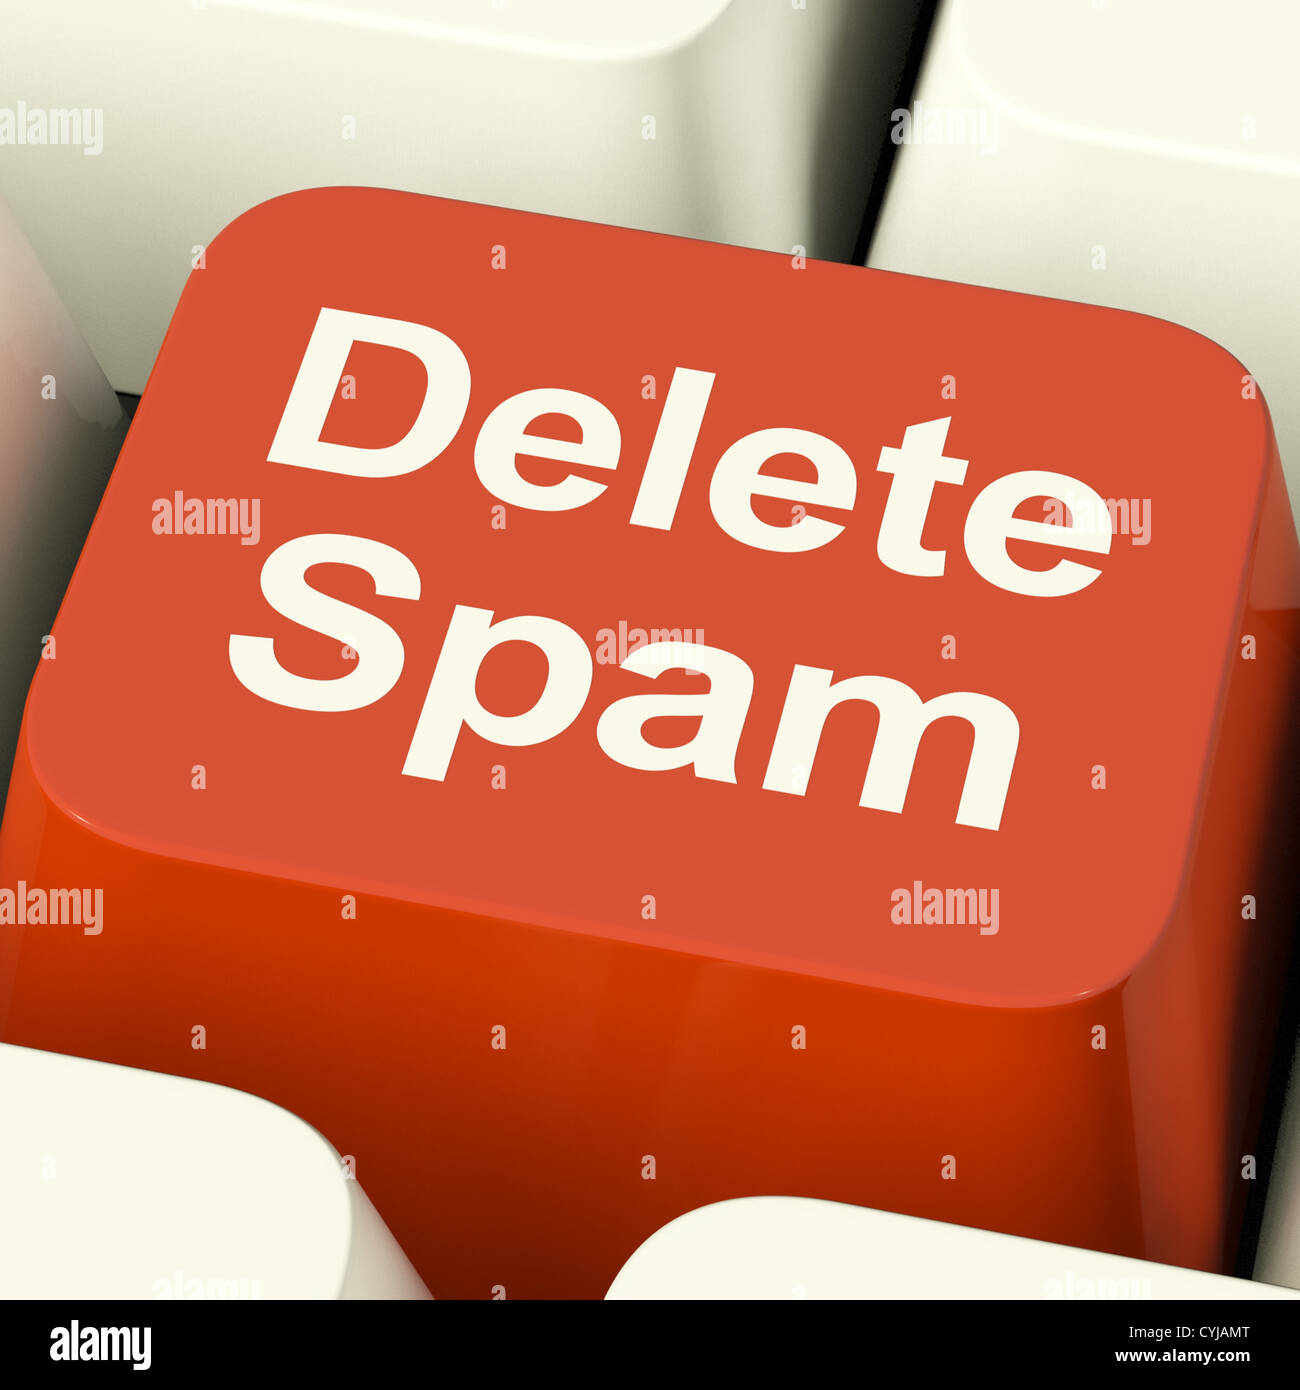 Delete Spam Key For Removing Unwanted Emails Stock Photo